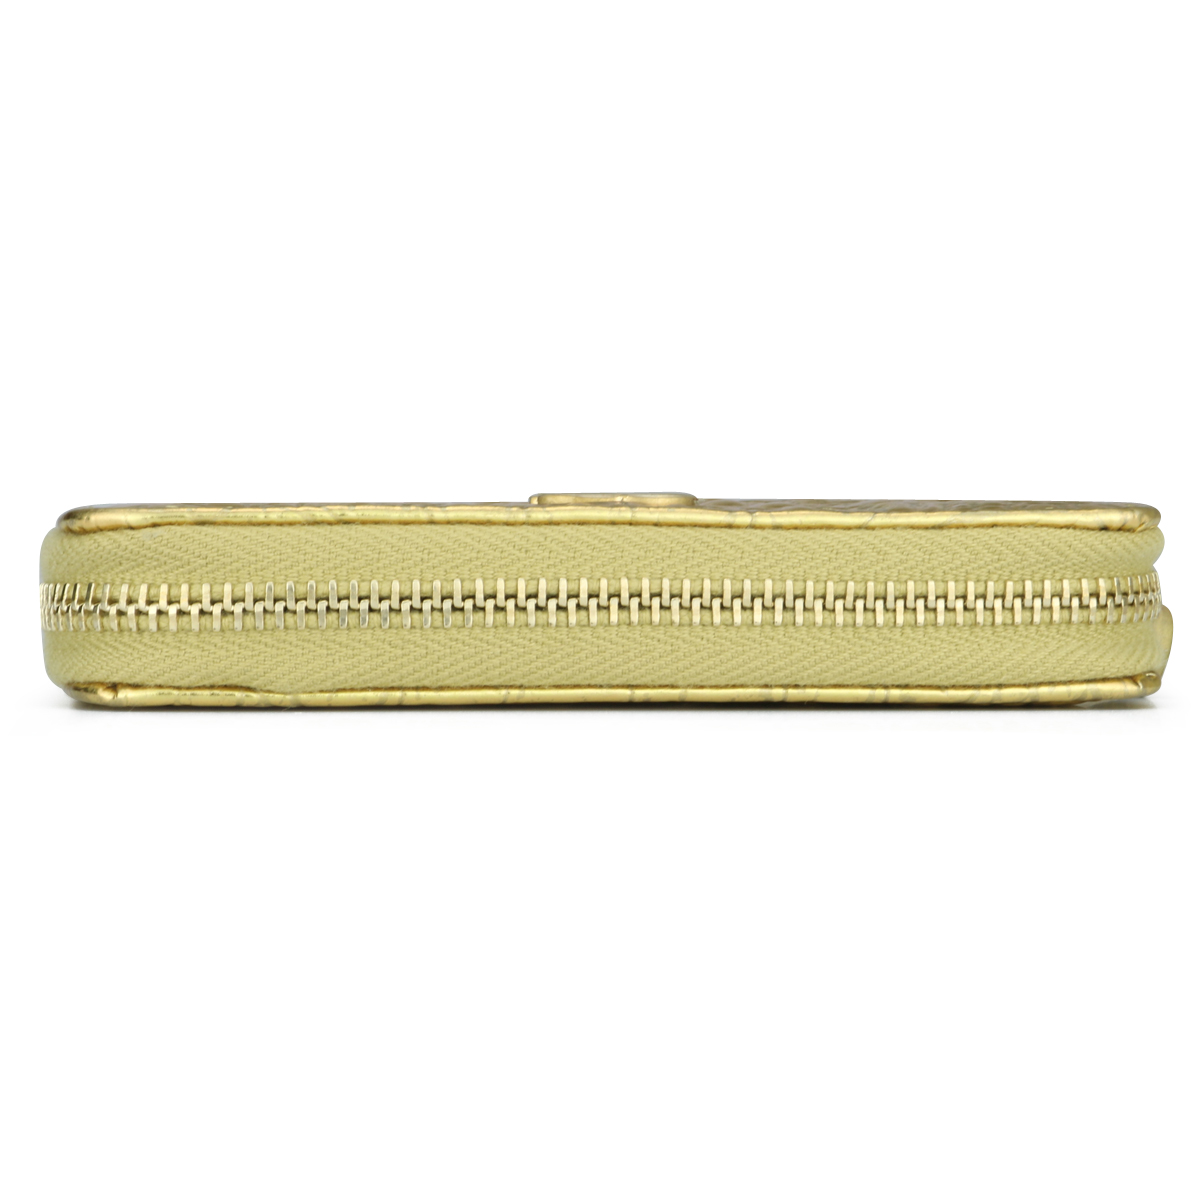 New CHANEL Gold Croc Embossed Zip O Coin Purse Wallet